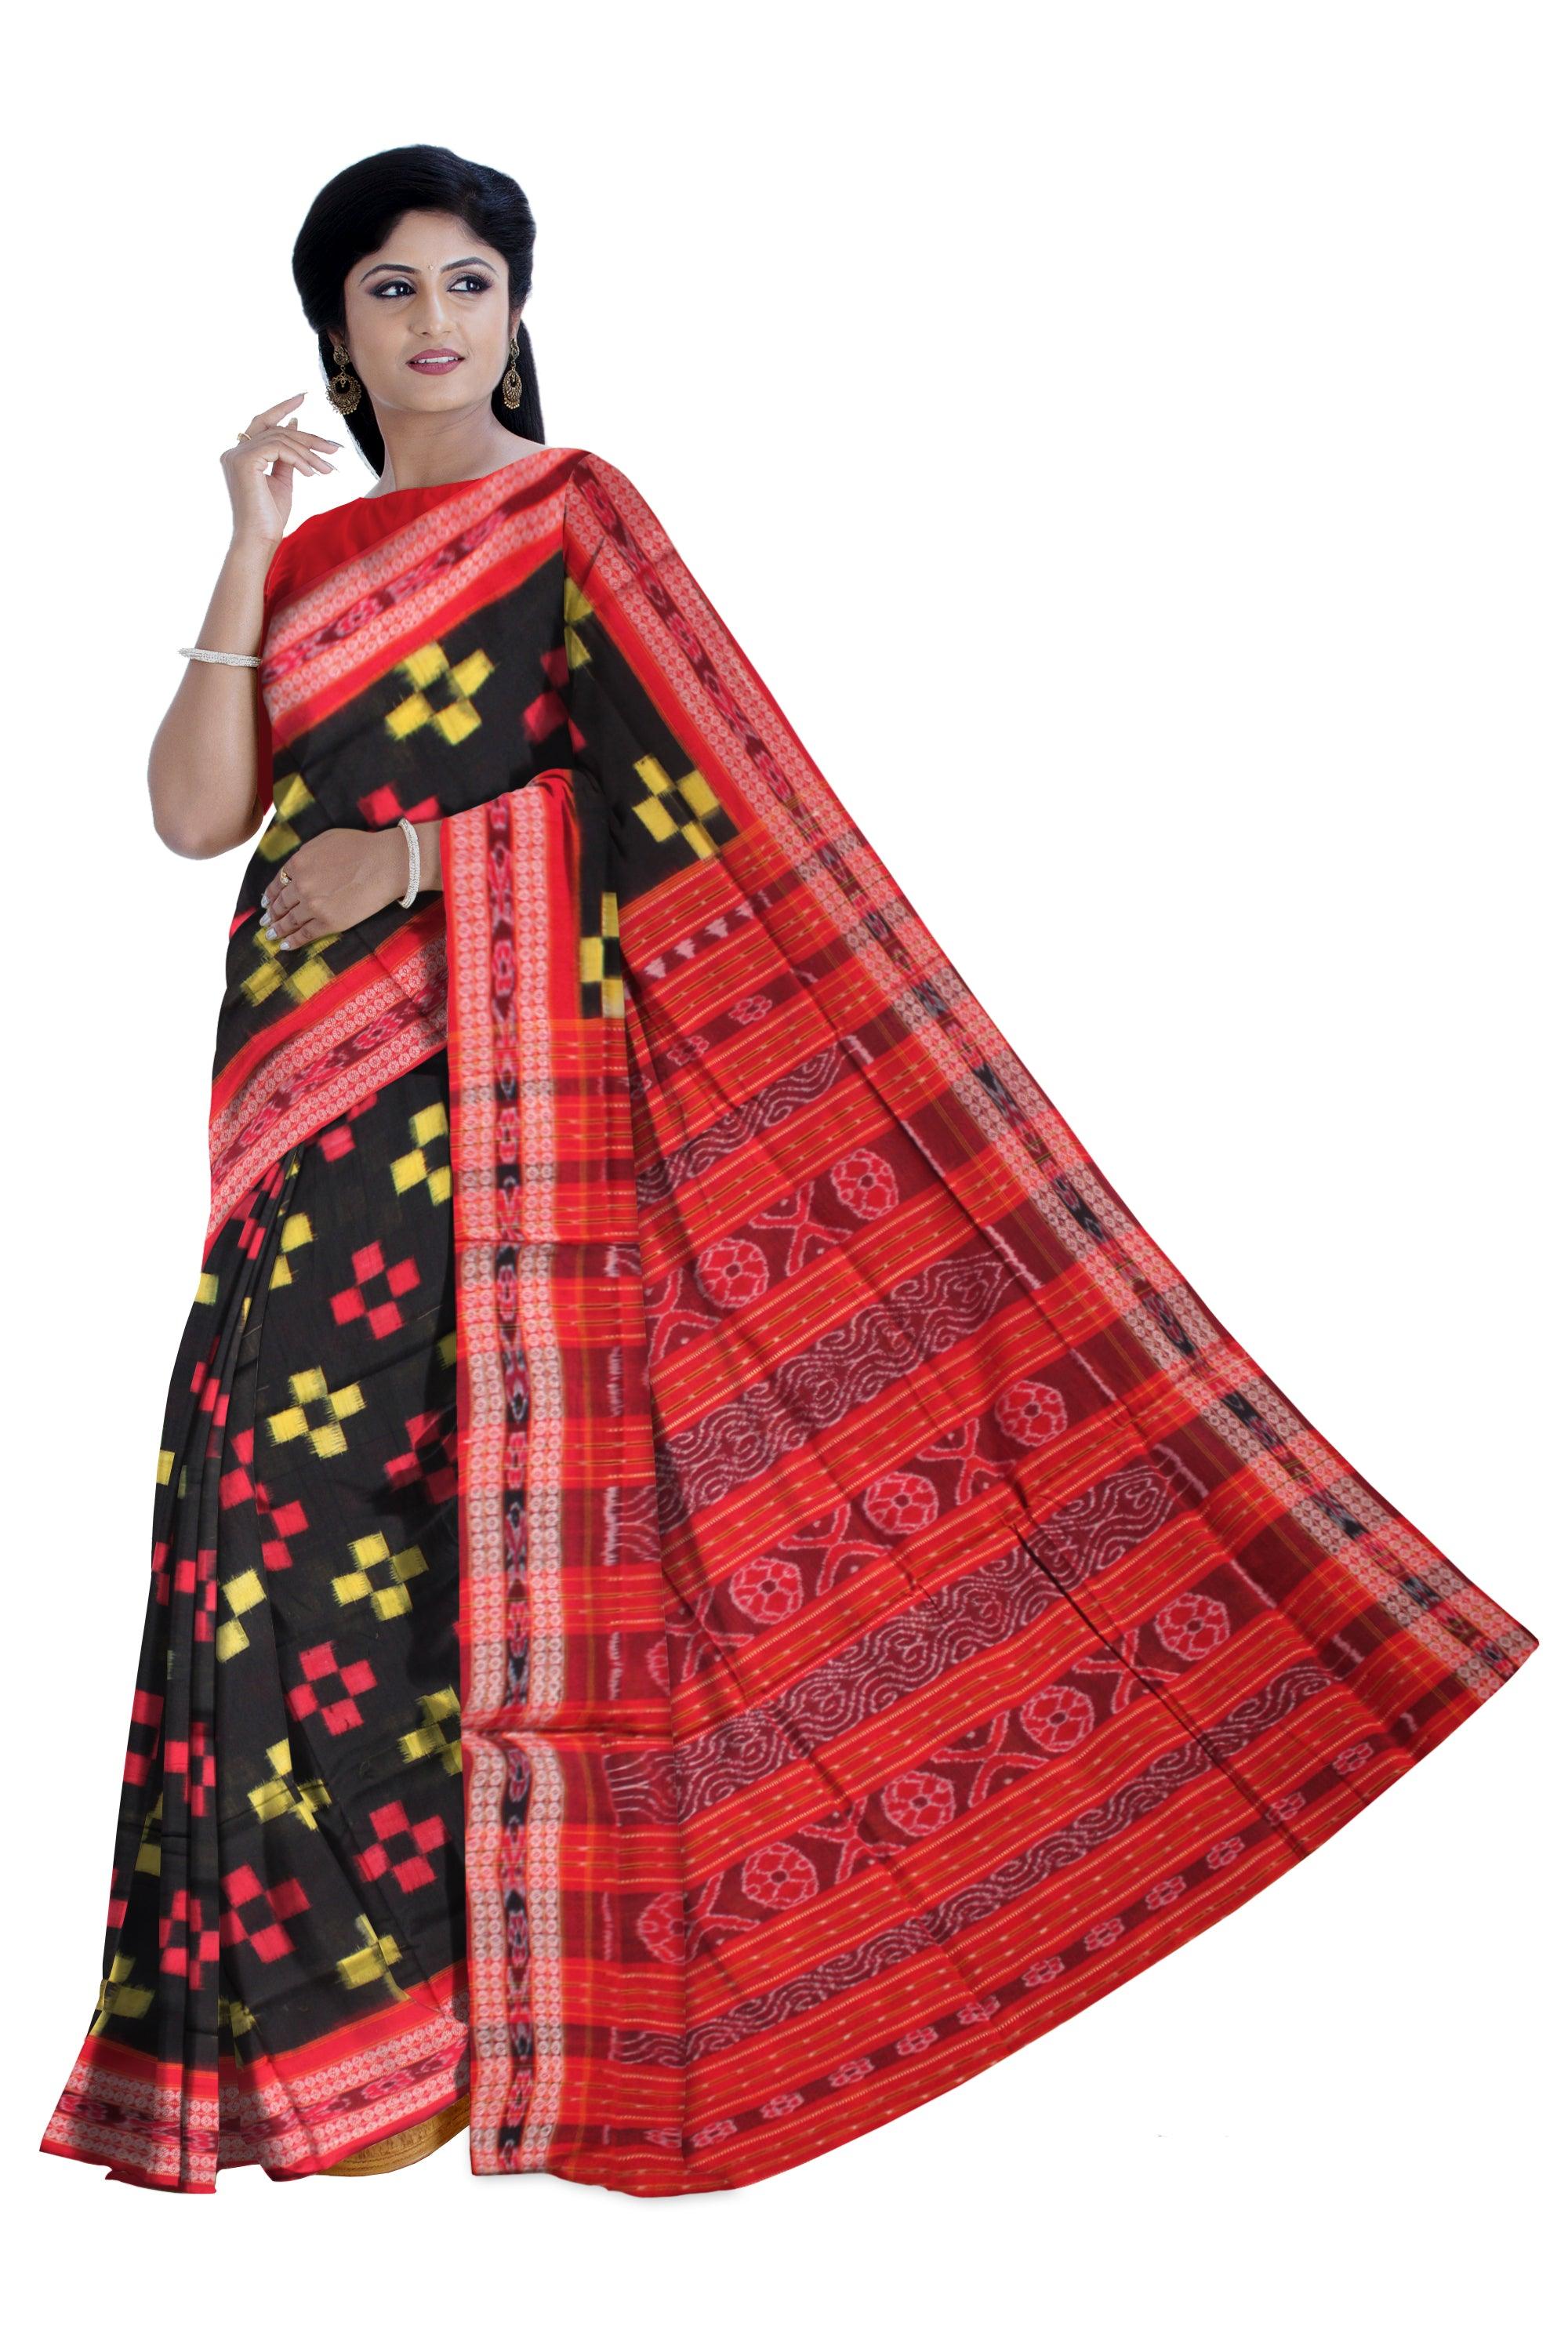 BLACK AND RED COLOR PASAPALI PATTERN COTTON SAREE, WITH  OUT BLOUSE PIECE. - Koshali Arts & Crafts Enterprise